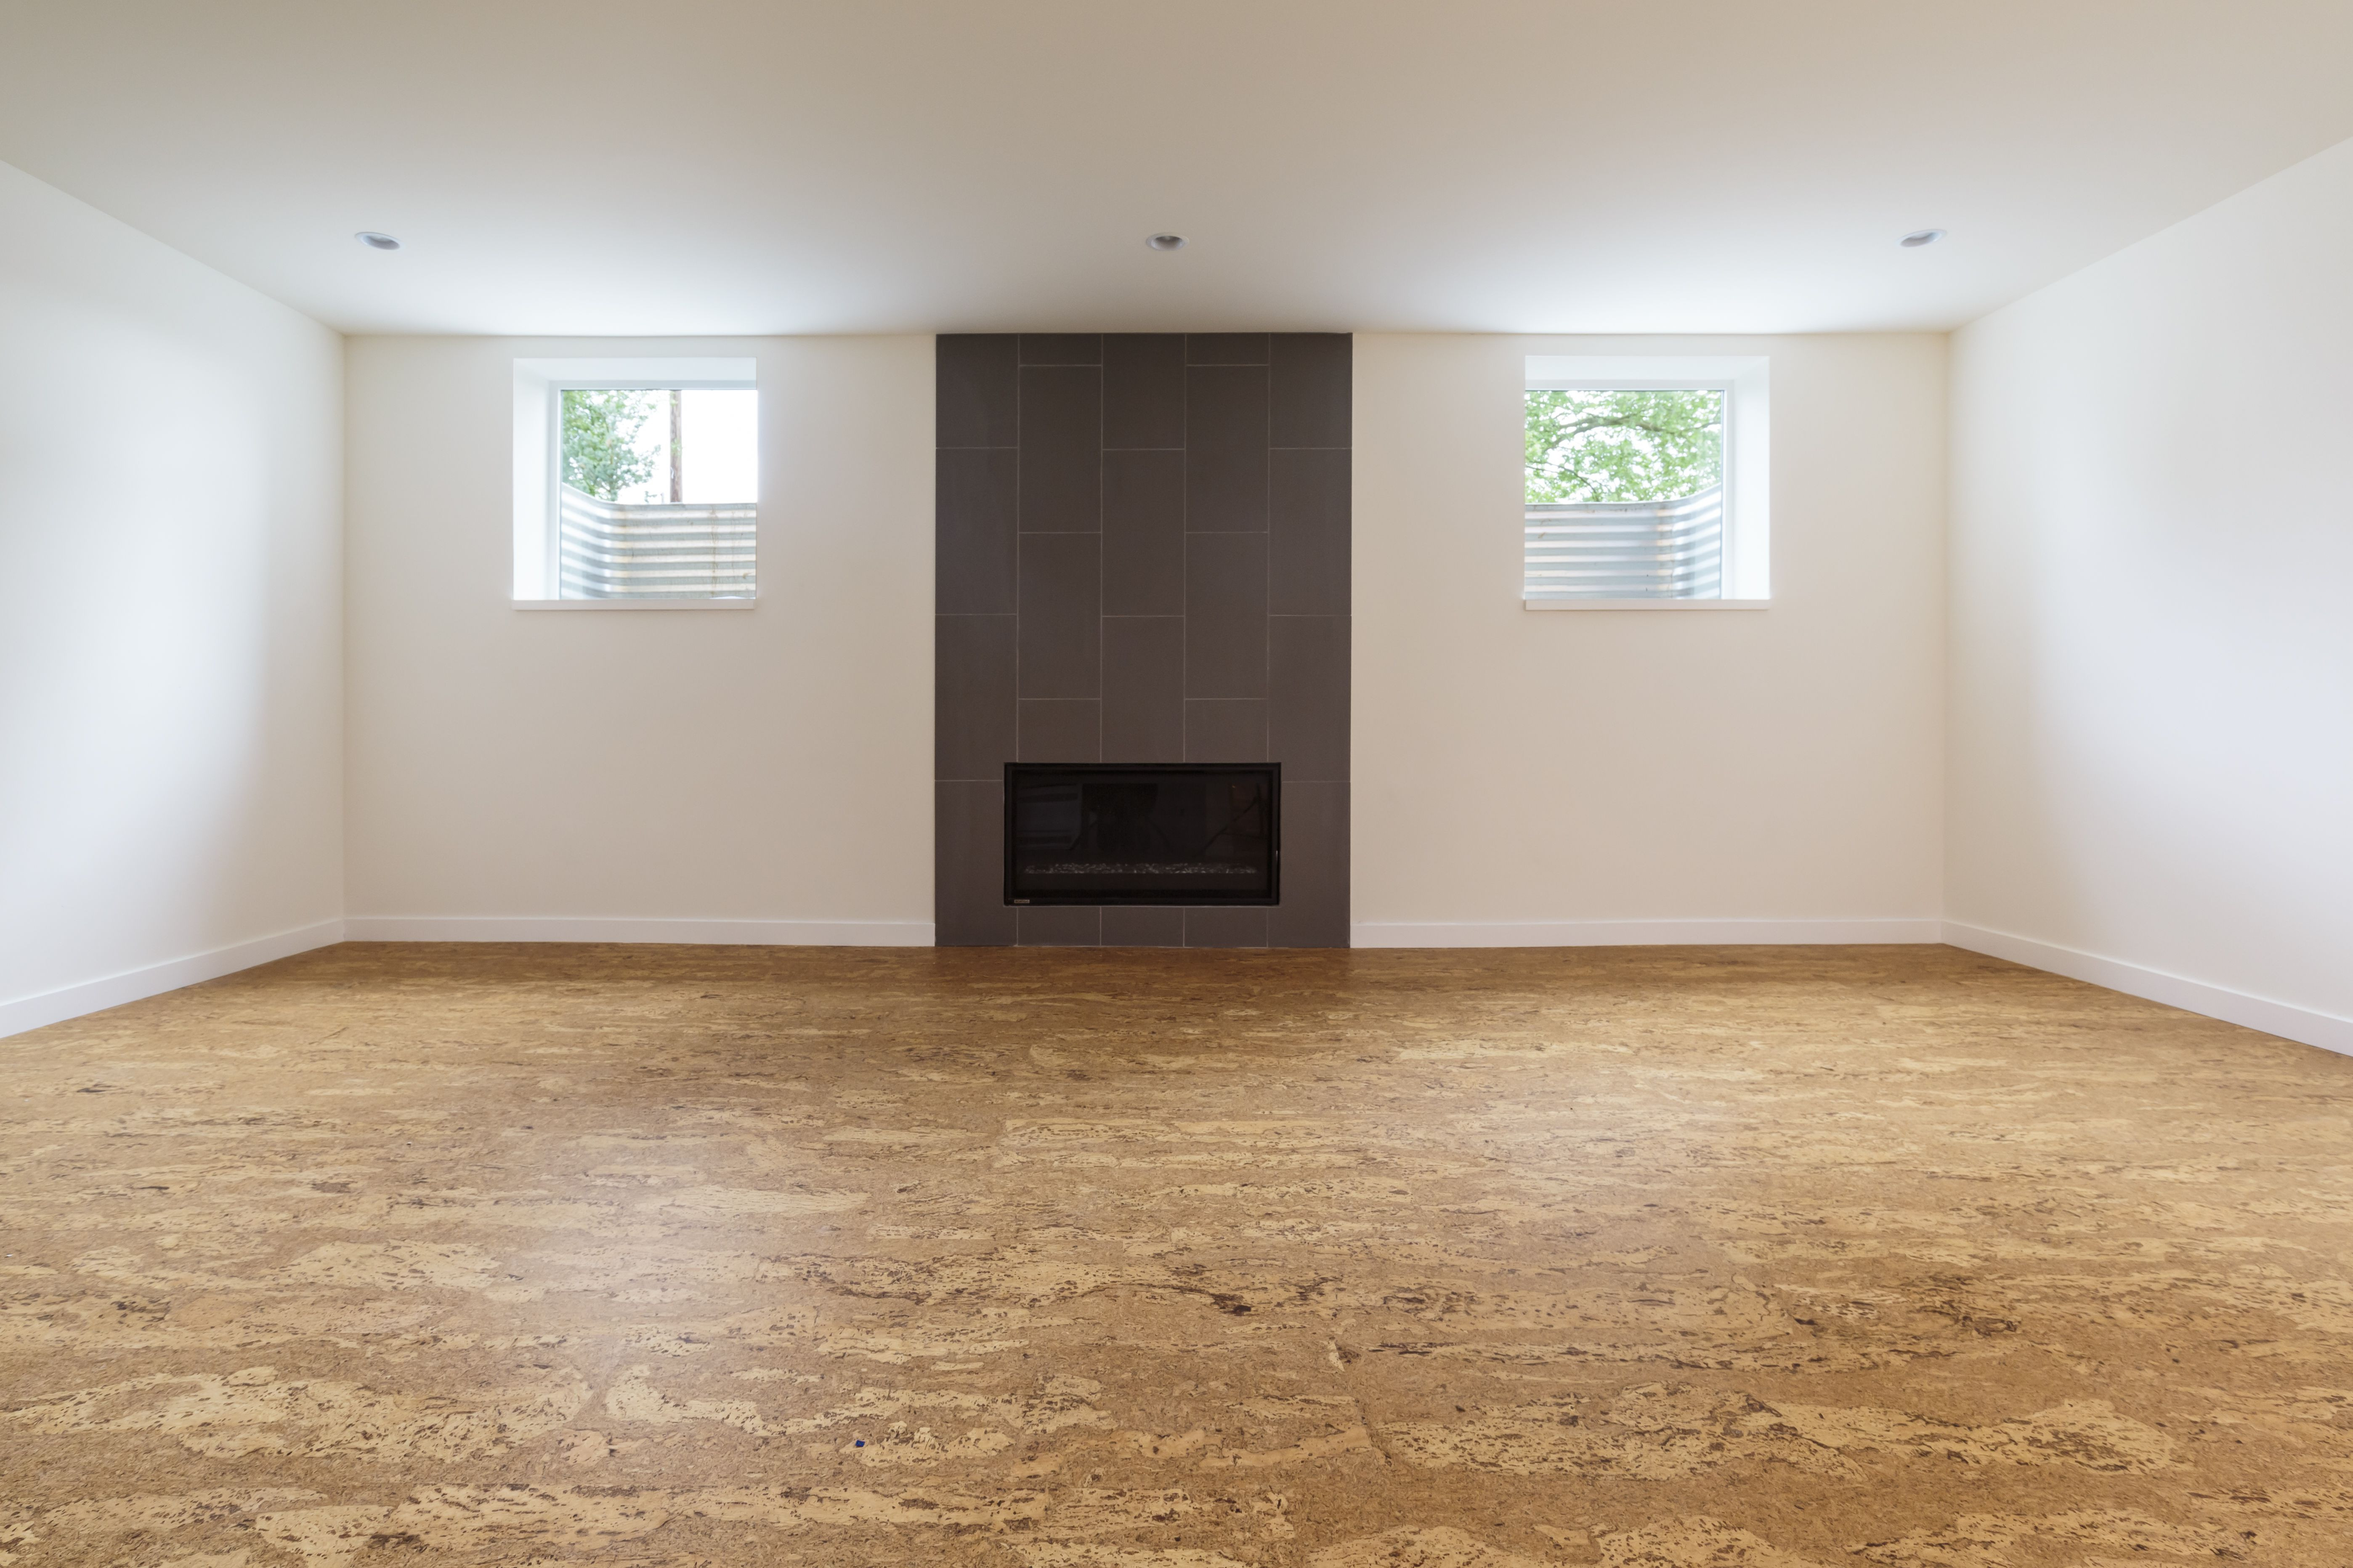 11 Awesome Hardwood Floor Cost Per Sq Foot 2024 free download hardwood floor cost per sq foot of cork flooring pros cons and cost for cork flooring in unfurnished new home 647206431 57e7c0c95f9b586c3504ca07